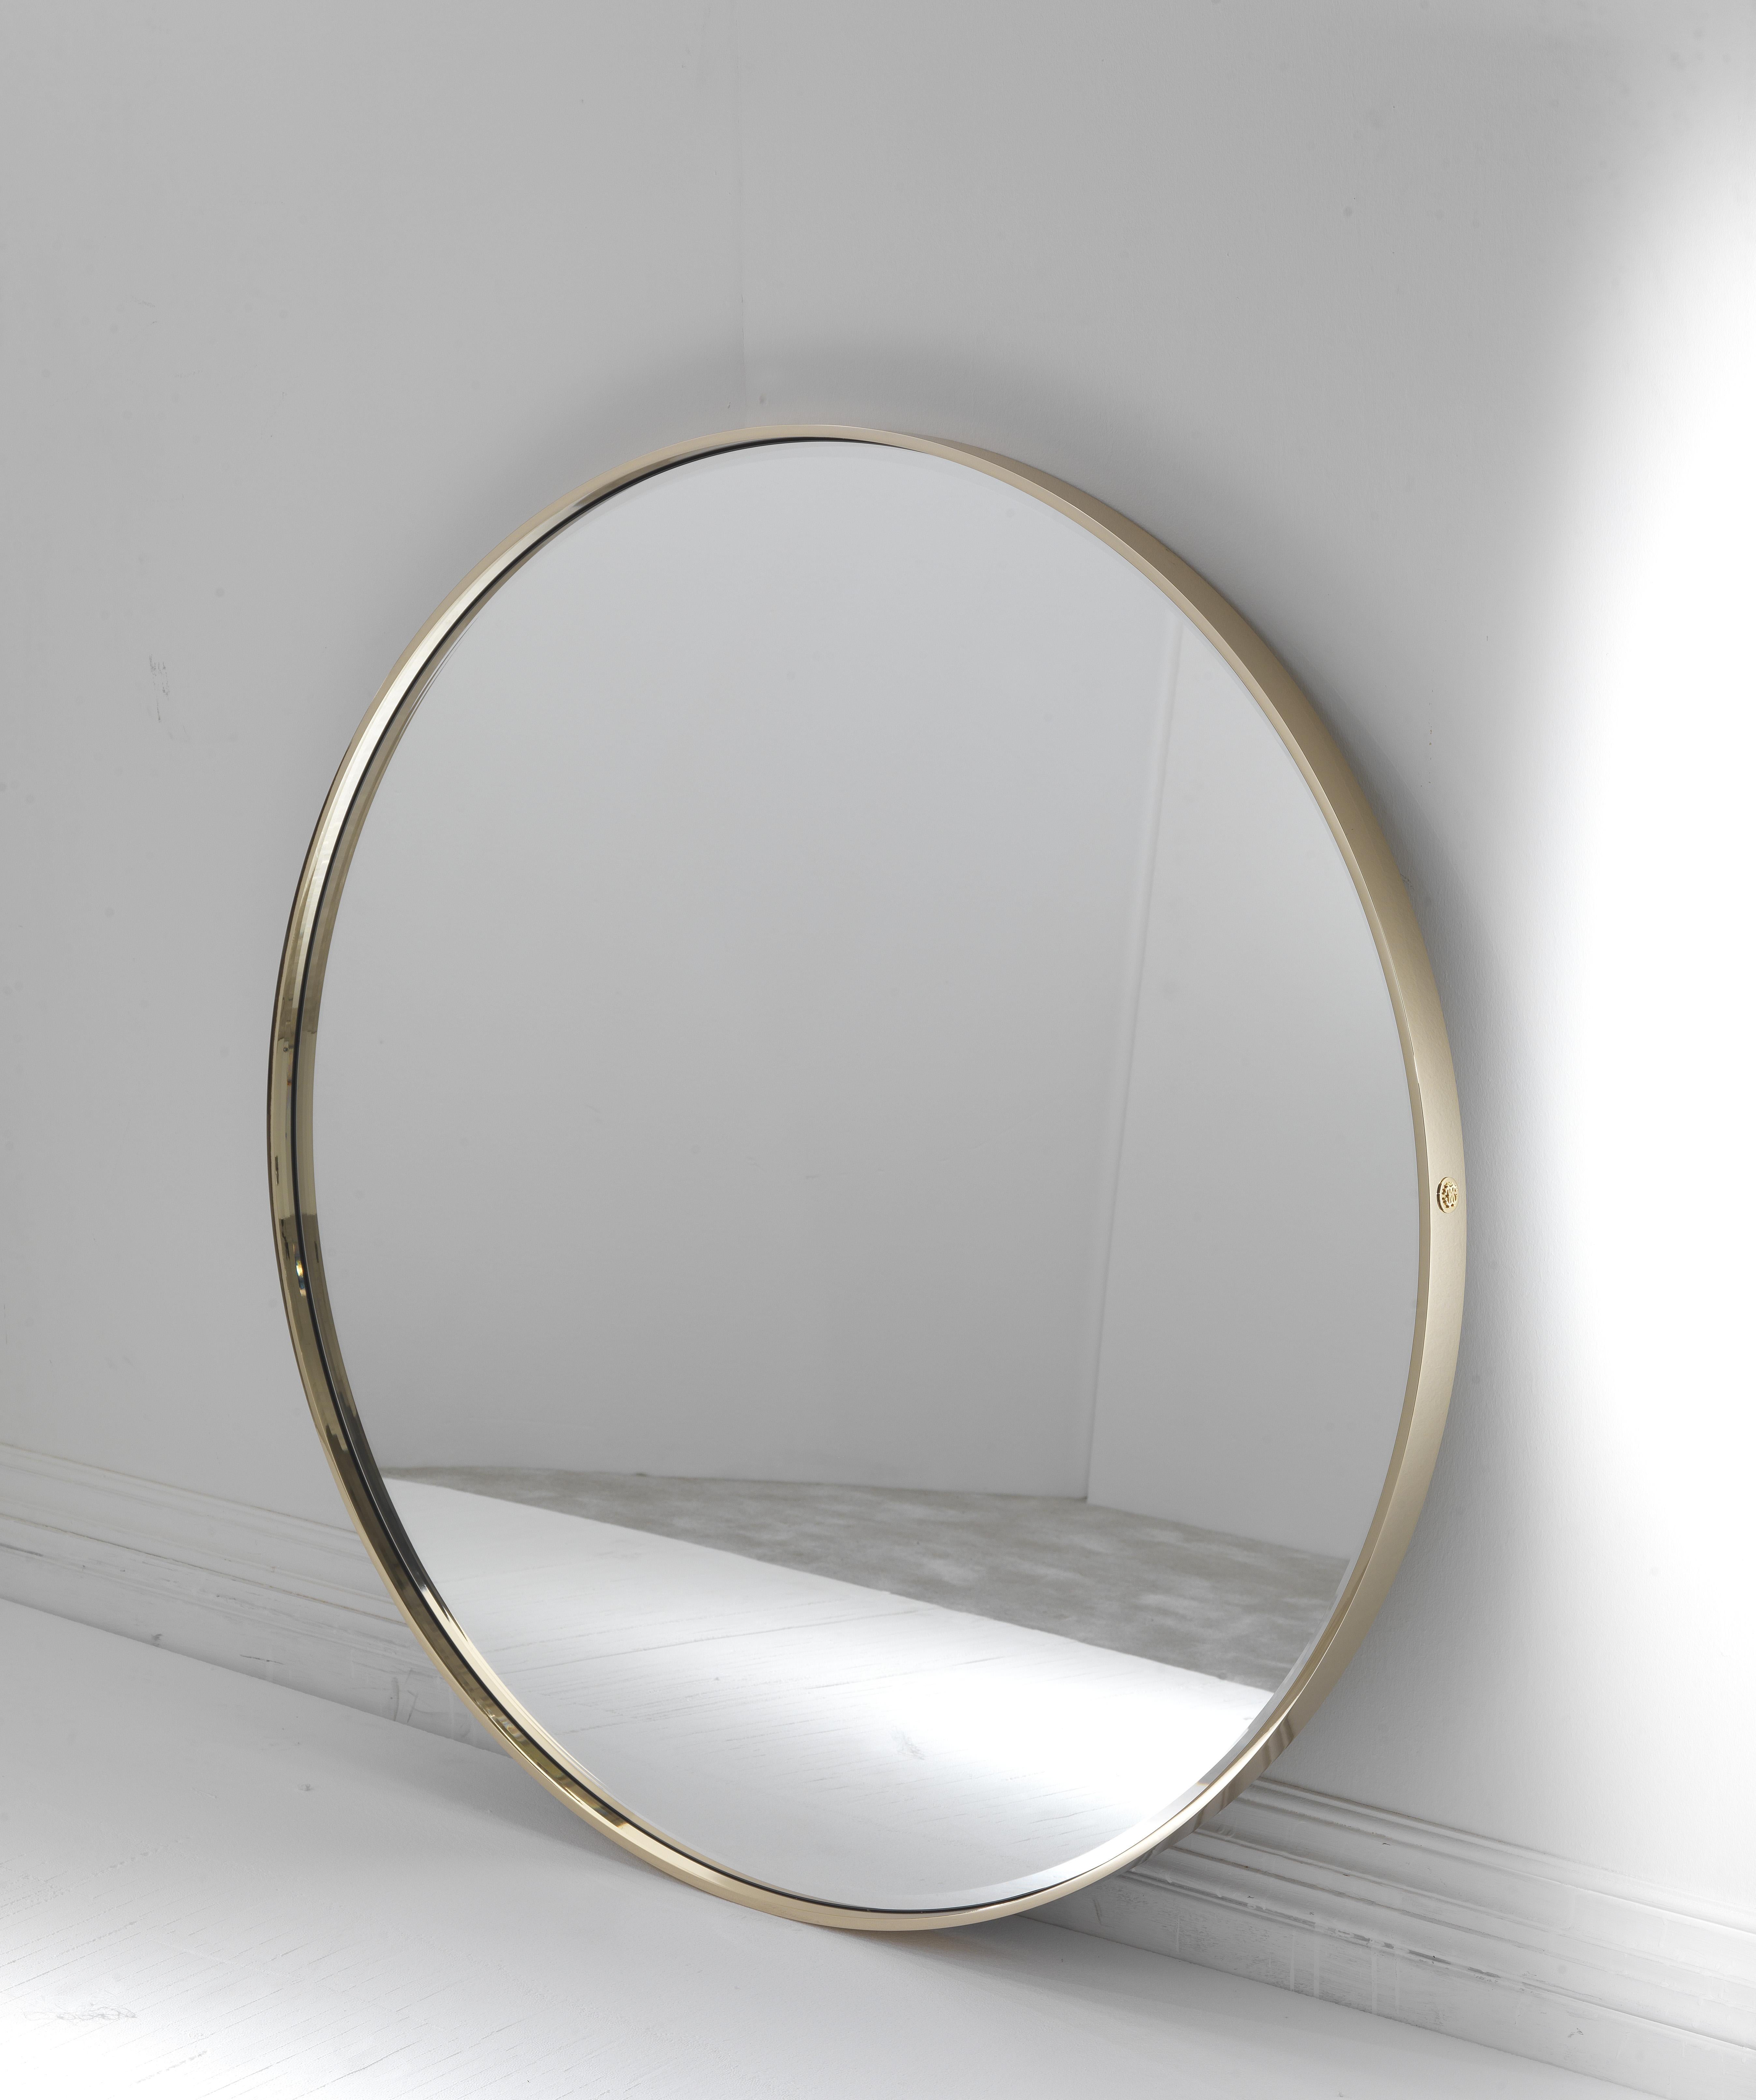 Casquet Mirror with metal frame in gold finishing. Natural mirror.